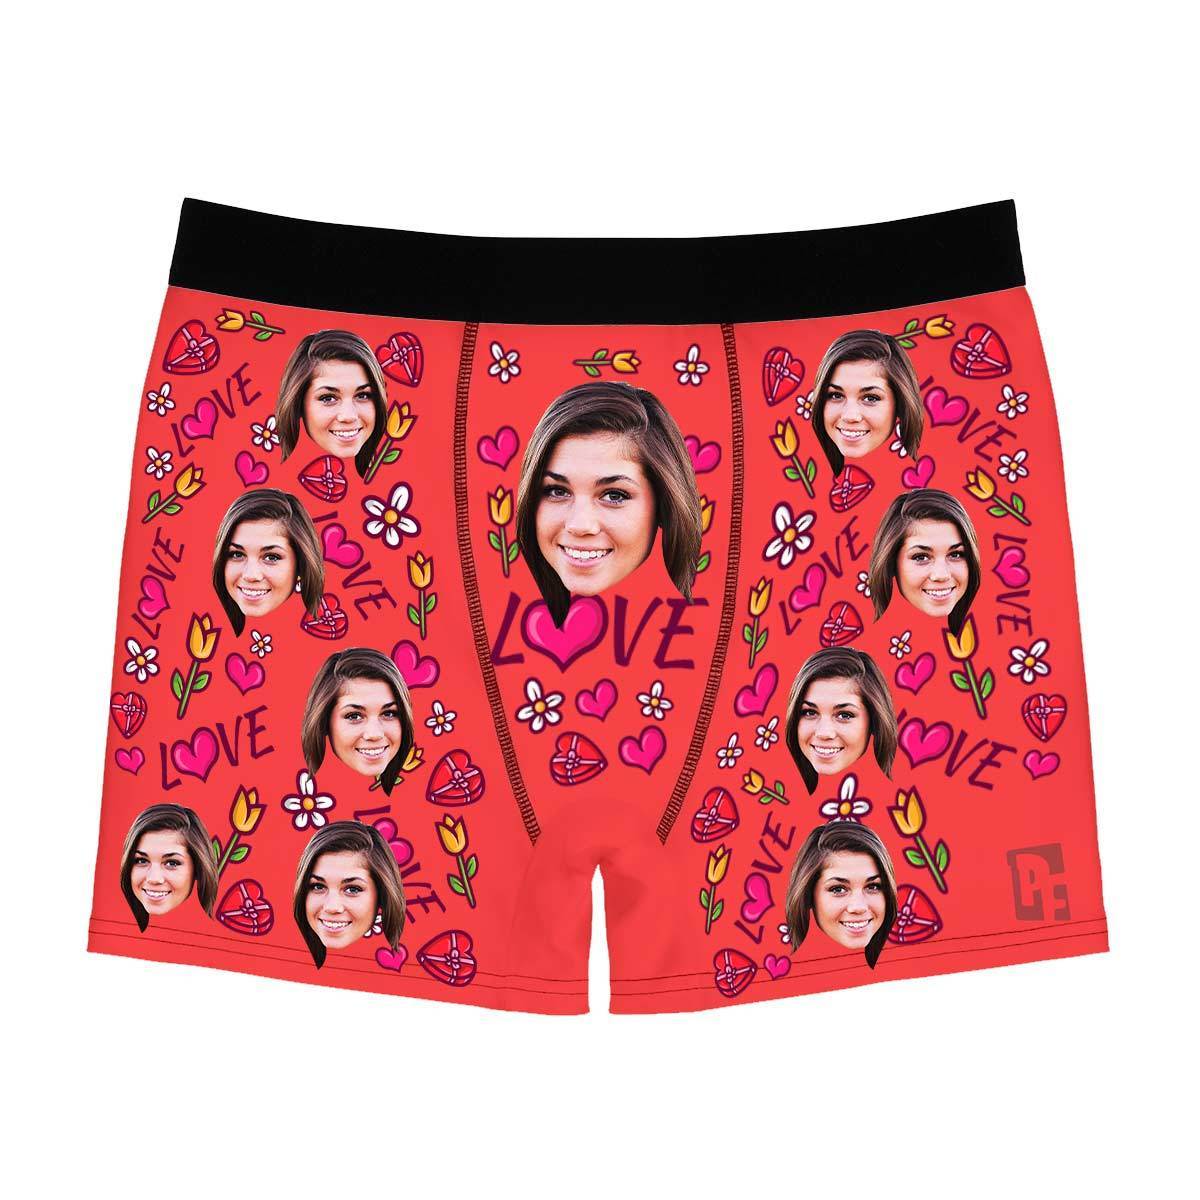 Red Hearts and Flowers men's boxer briefs personalized with photo printed on them